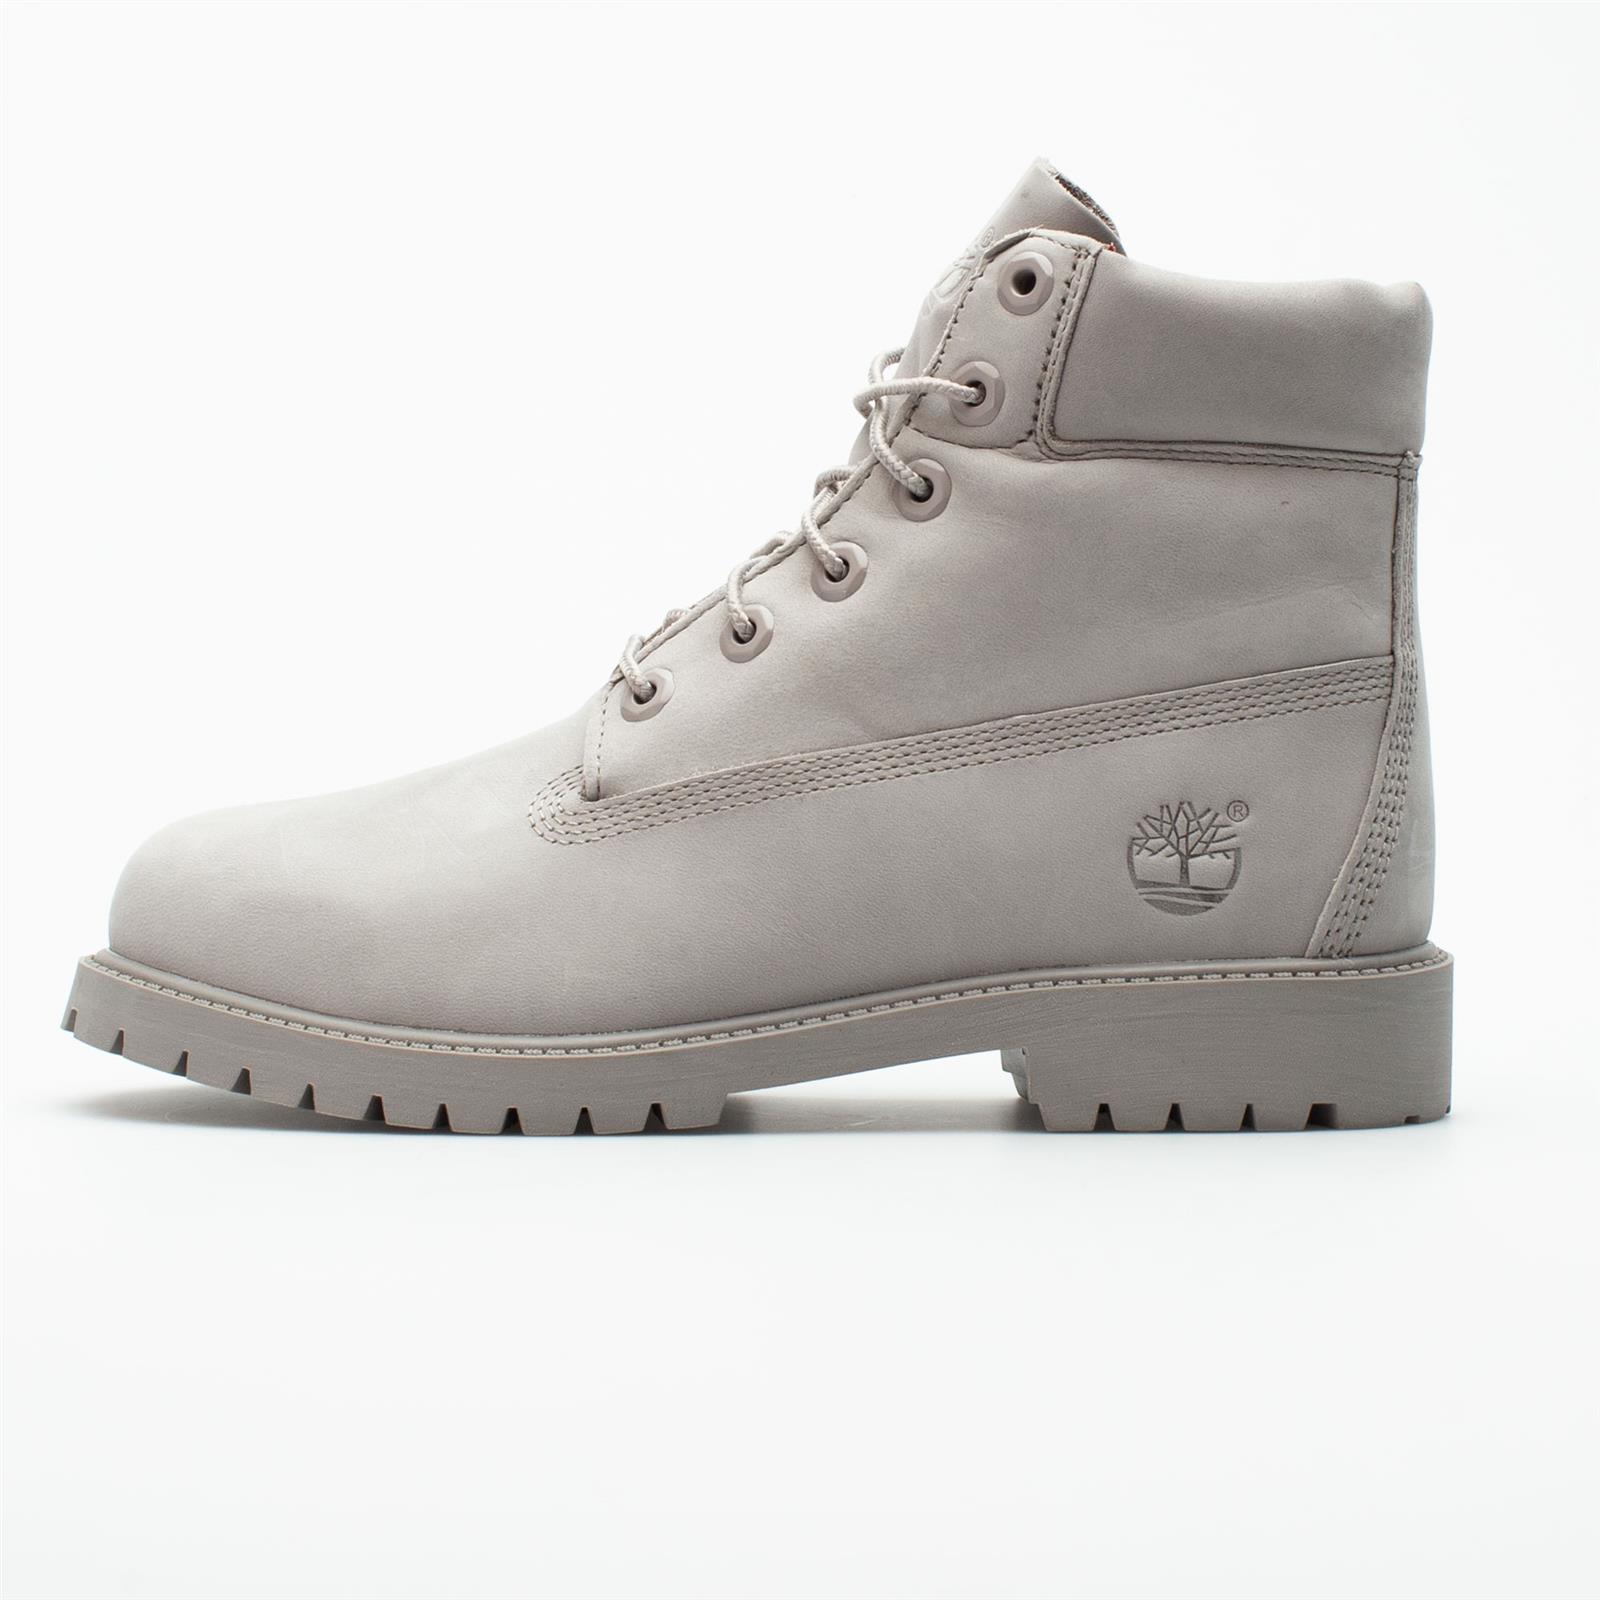 consensus platform Fade out Timberland PREMIUM 6 INCH BOOT WP J GREY | Brands \ #Marki - 5 \ Timberland  Women's \ Women's footwear \ Trappers Men's \ Men's footwear \ Trapper Boots